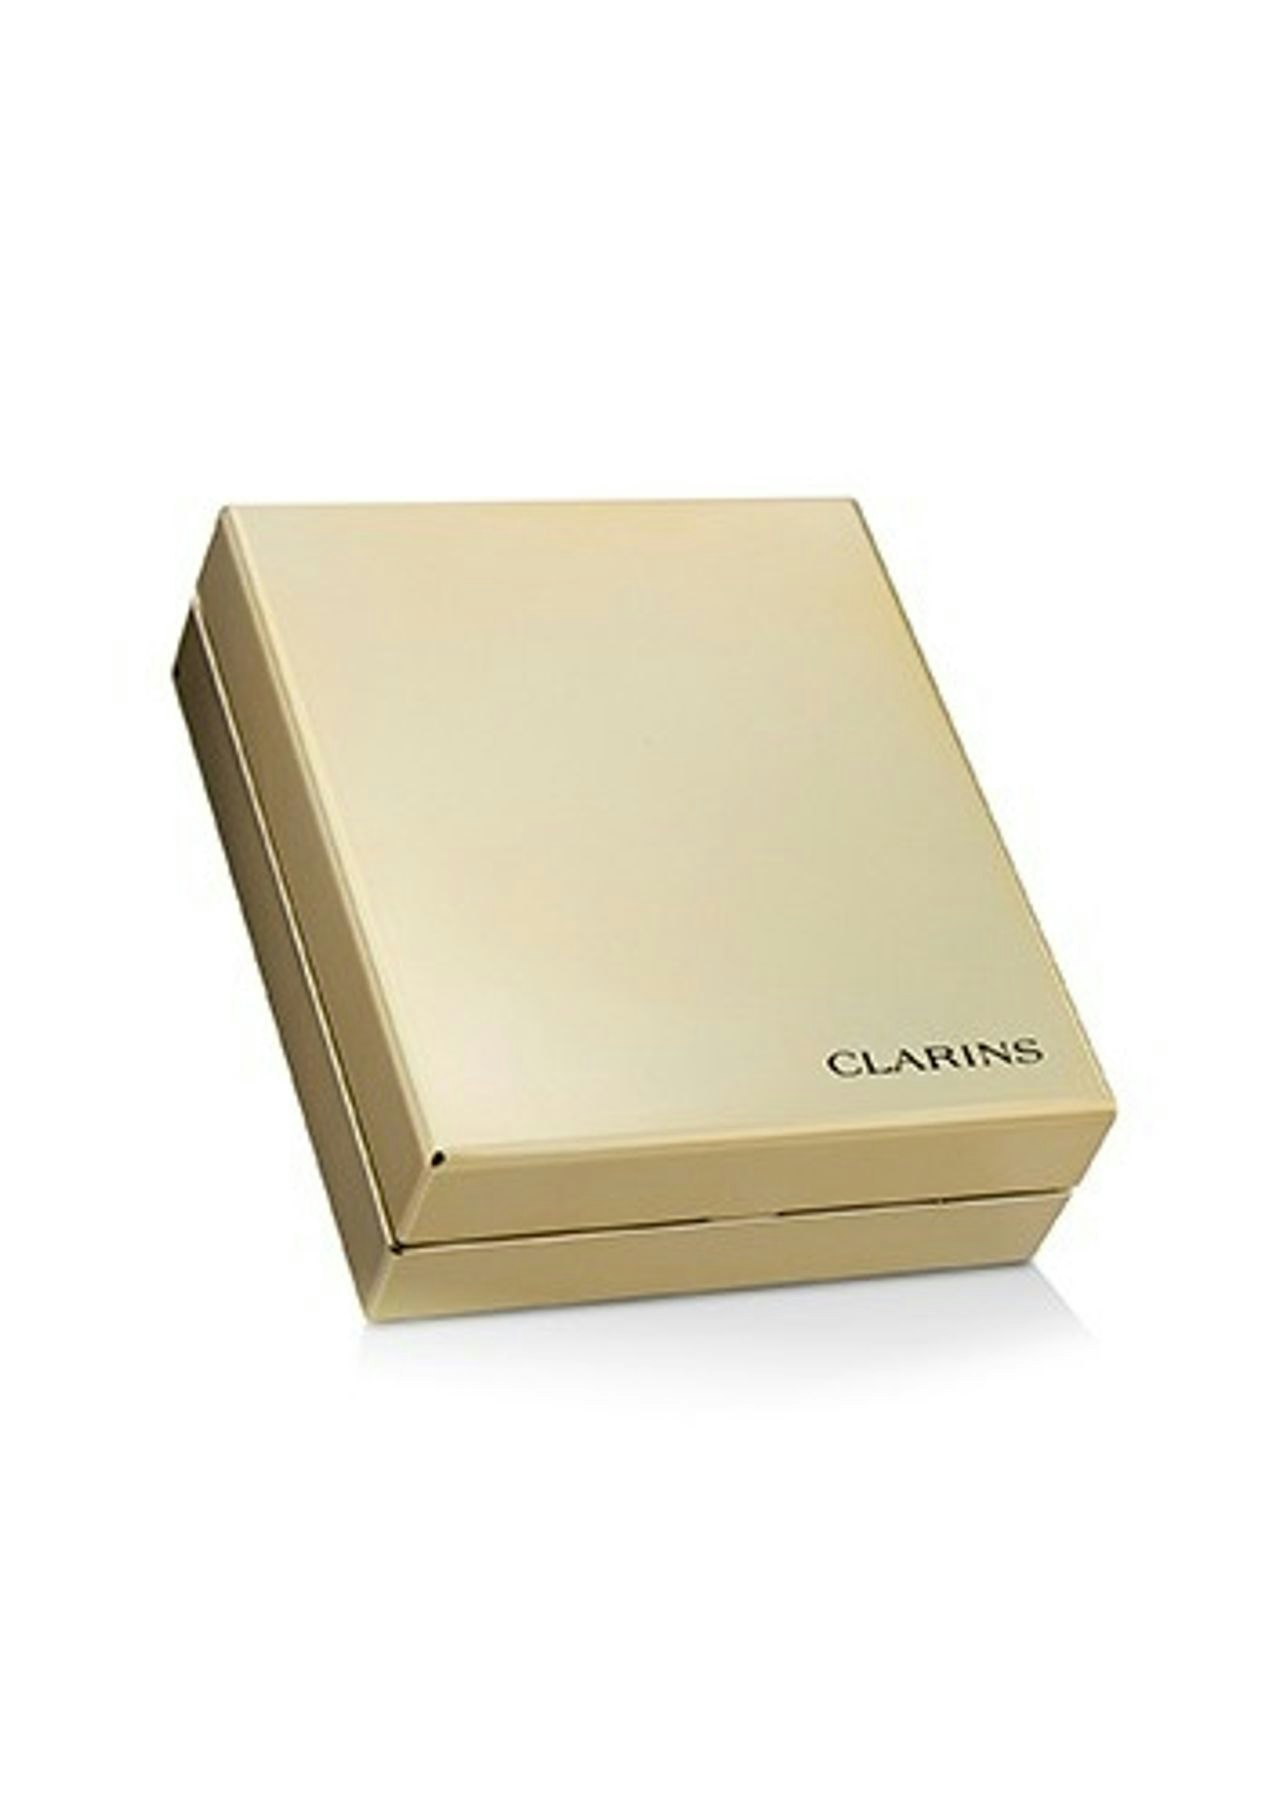 Everlasting Compact Foundation SPF 9 - 105 Nude by Clarins 